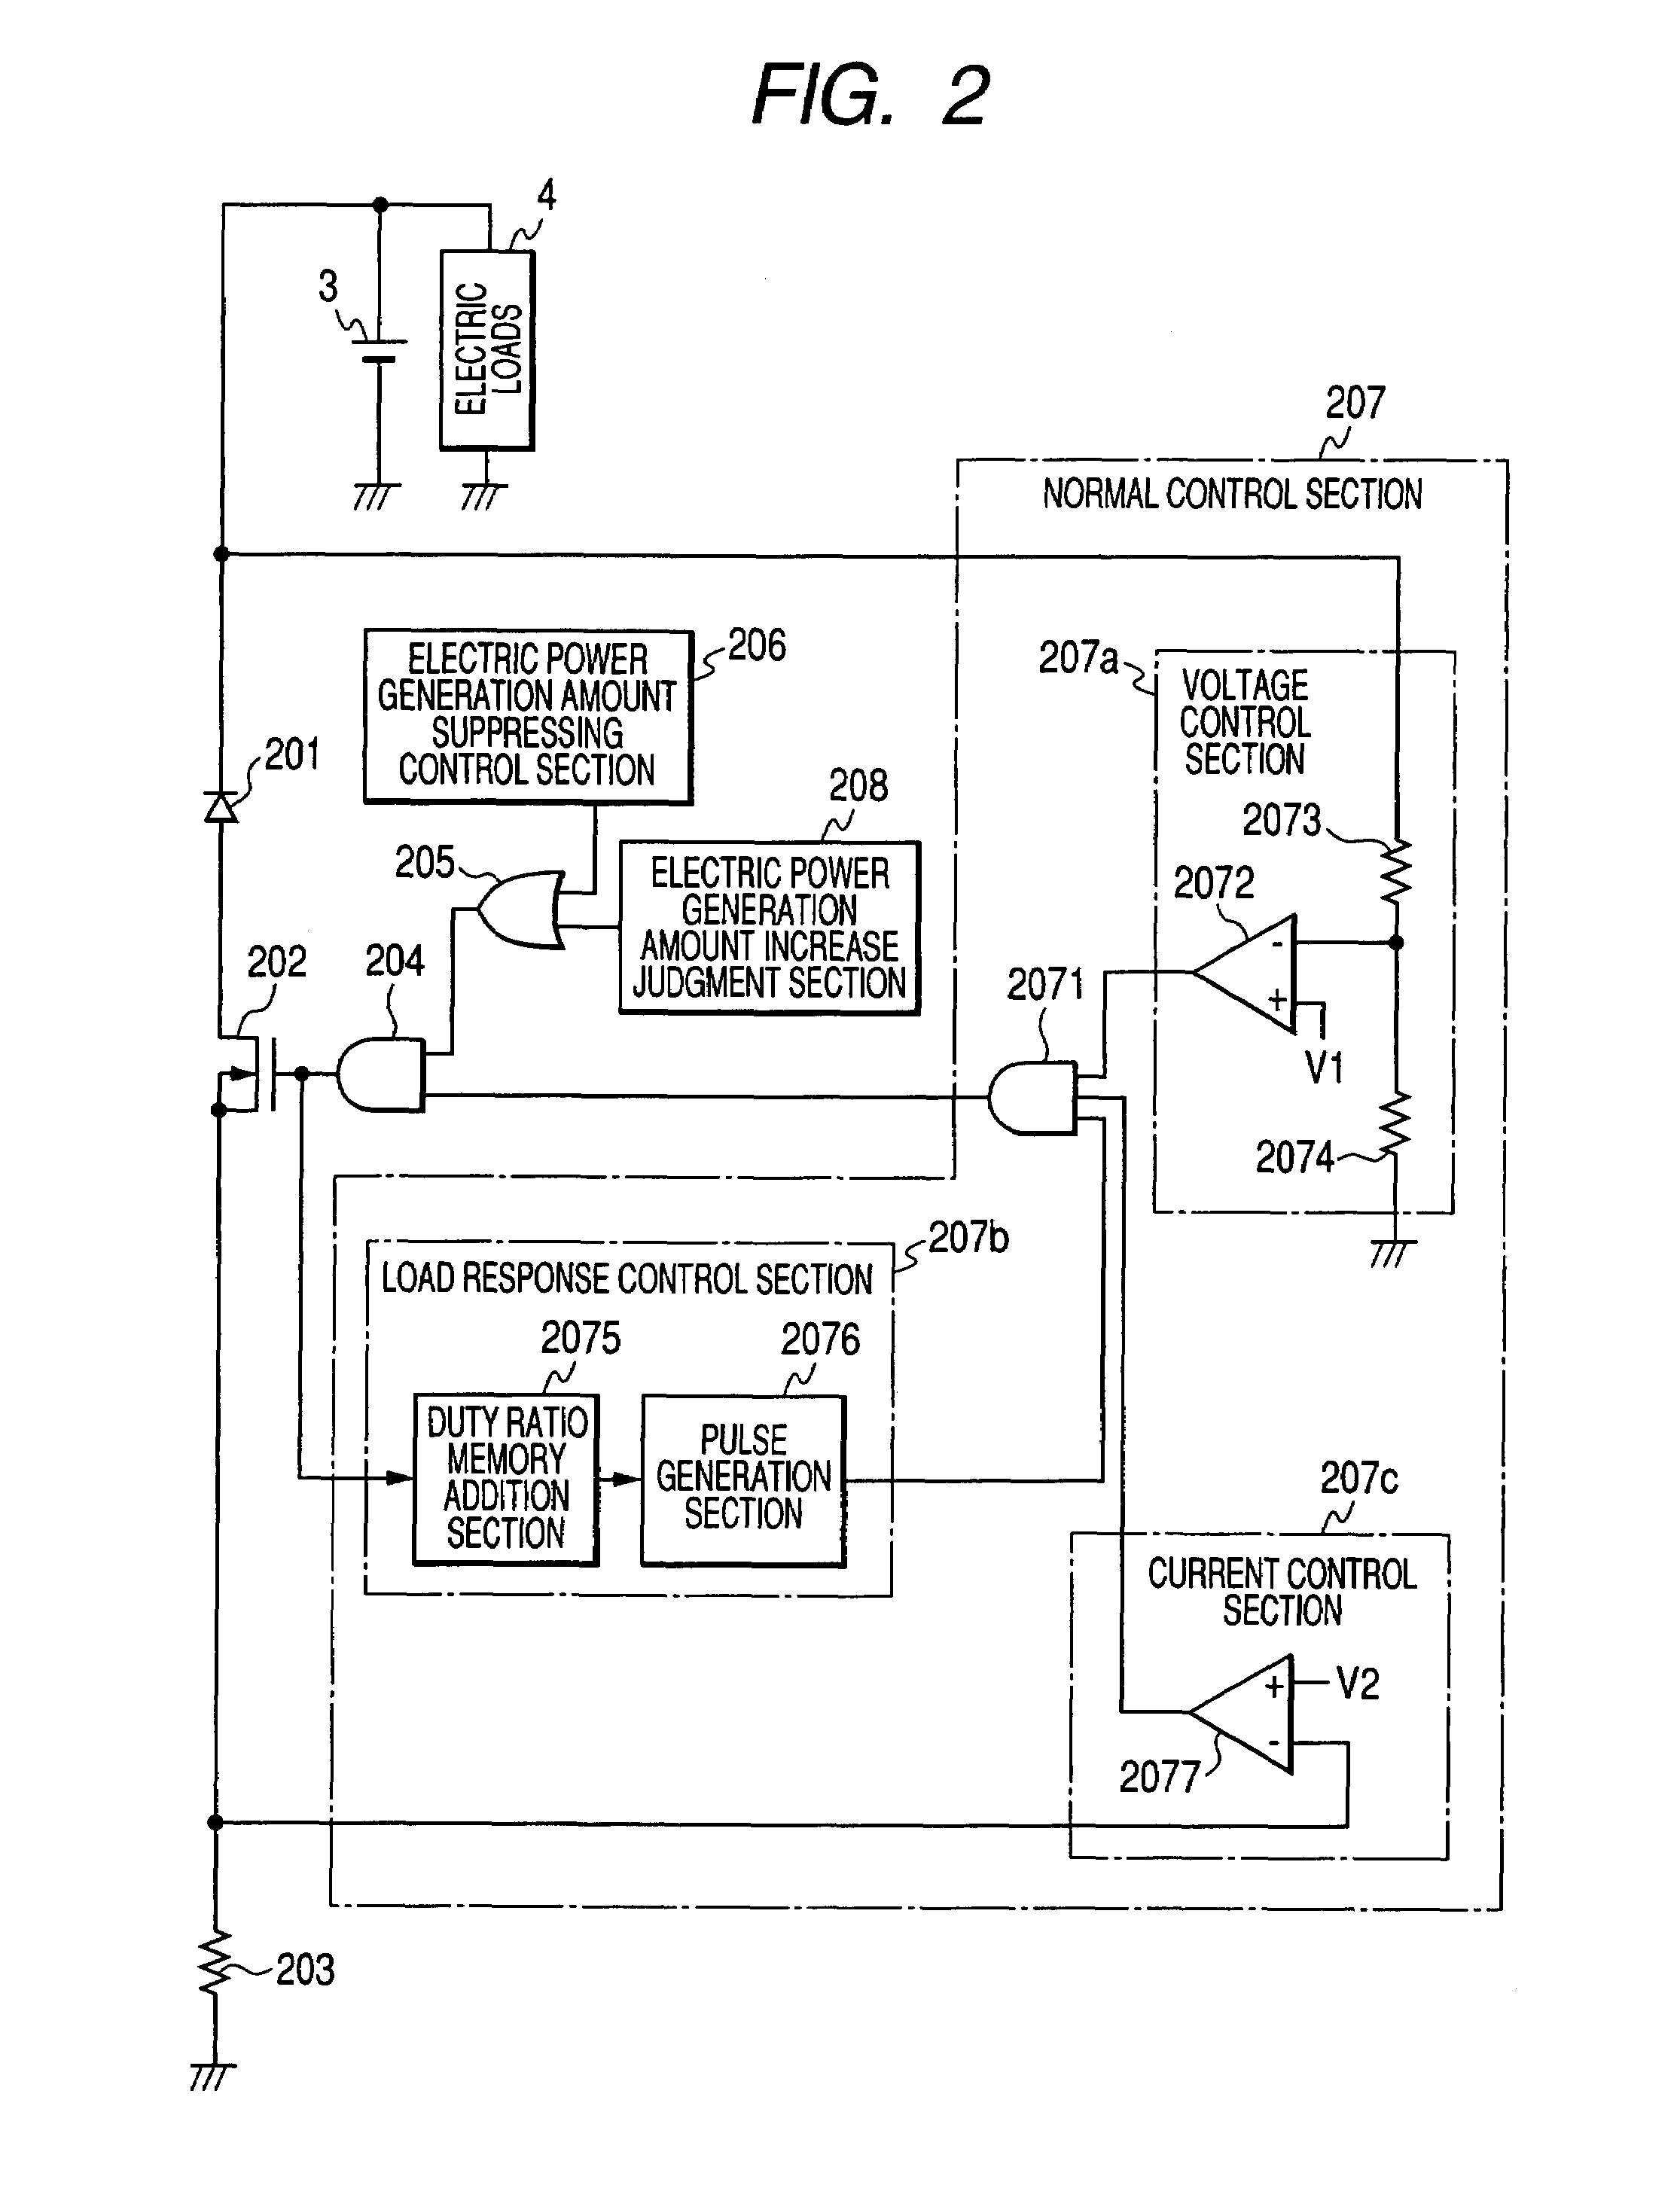 Electric power generation control system